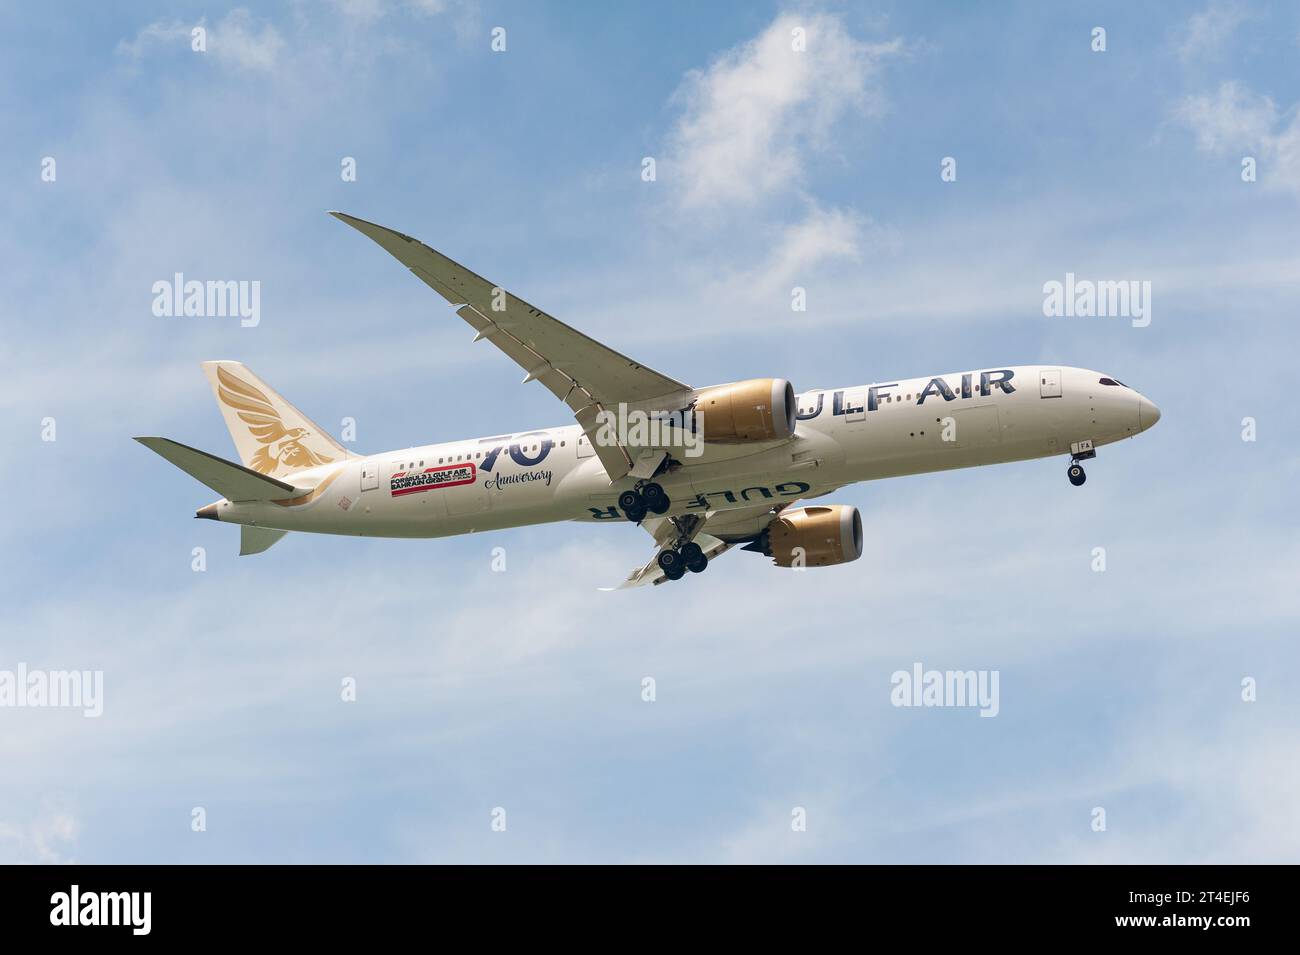 15.07.2023, Singapore, Republic of Singapore, Asia - Gulf Air Boeing 787-9 Dreamliner passenger jet approaches Changi Airport for landing. Stock Photo